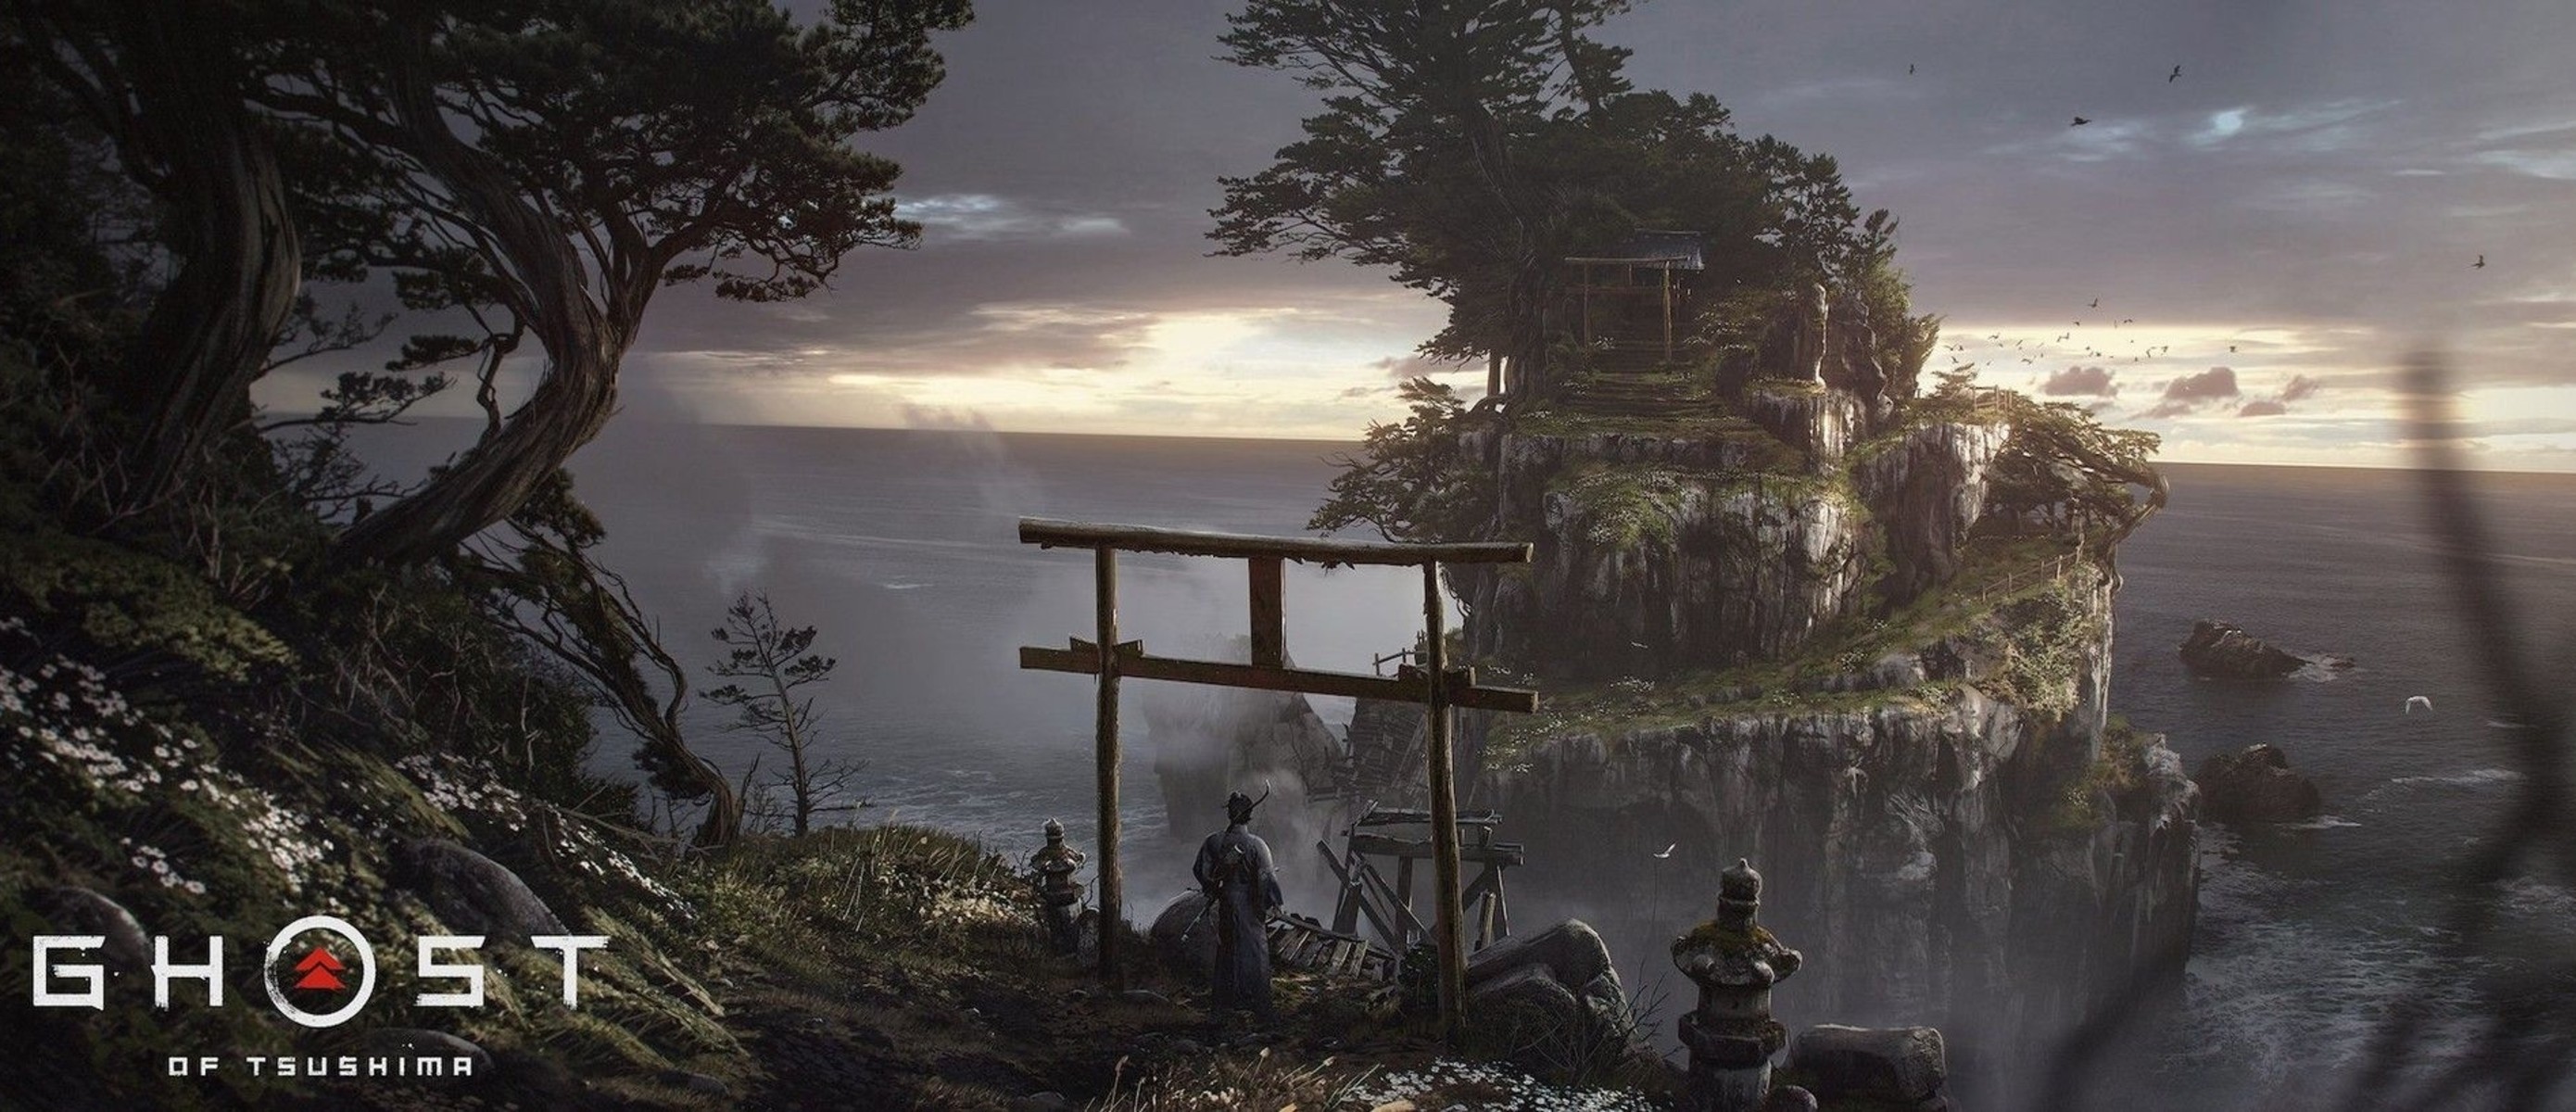 Ghost Of Tsushima background picture